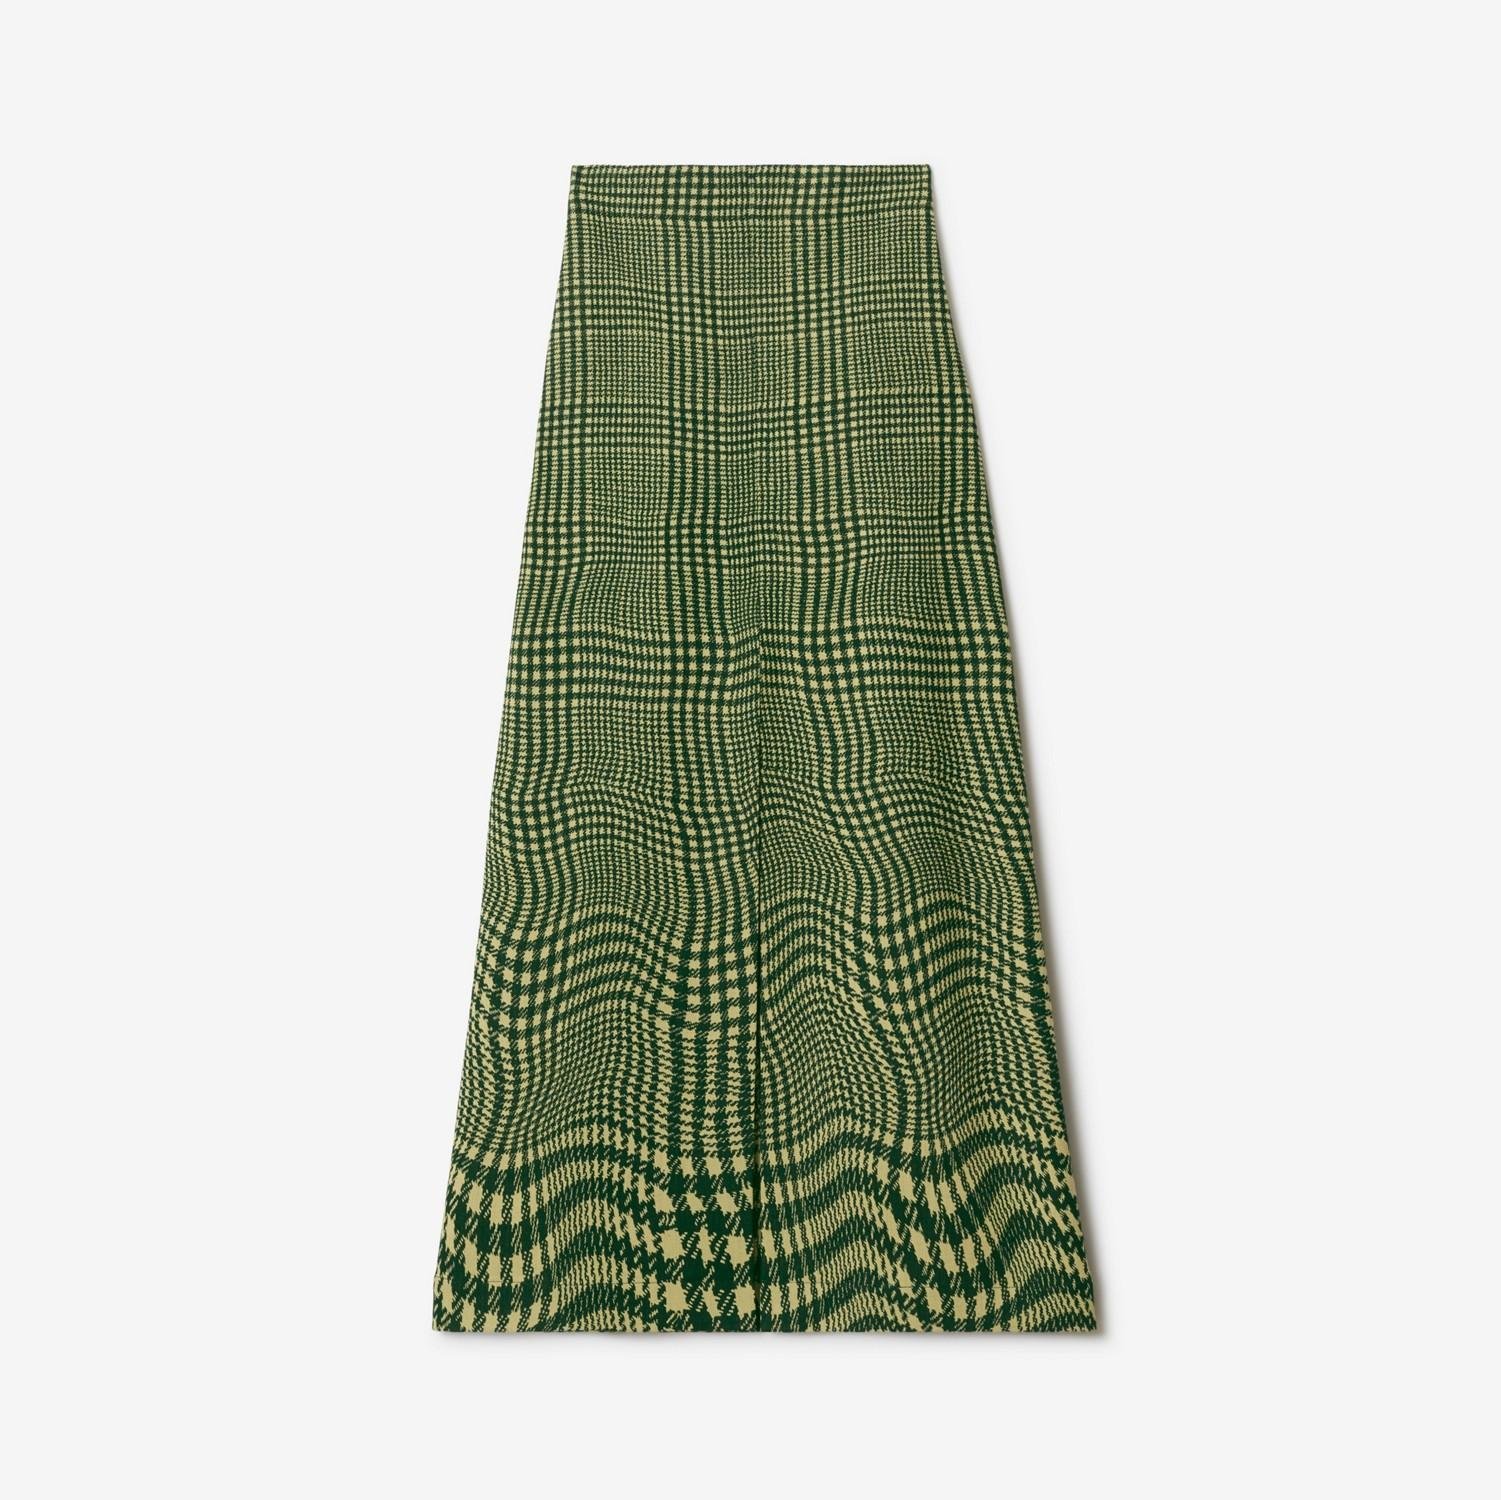 Warped Houndstooth Wool Skirt by BURBERRY